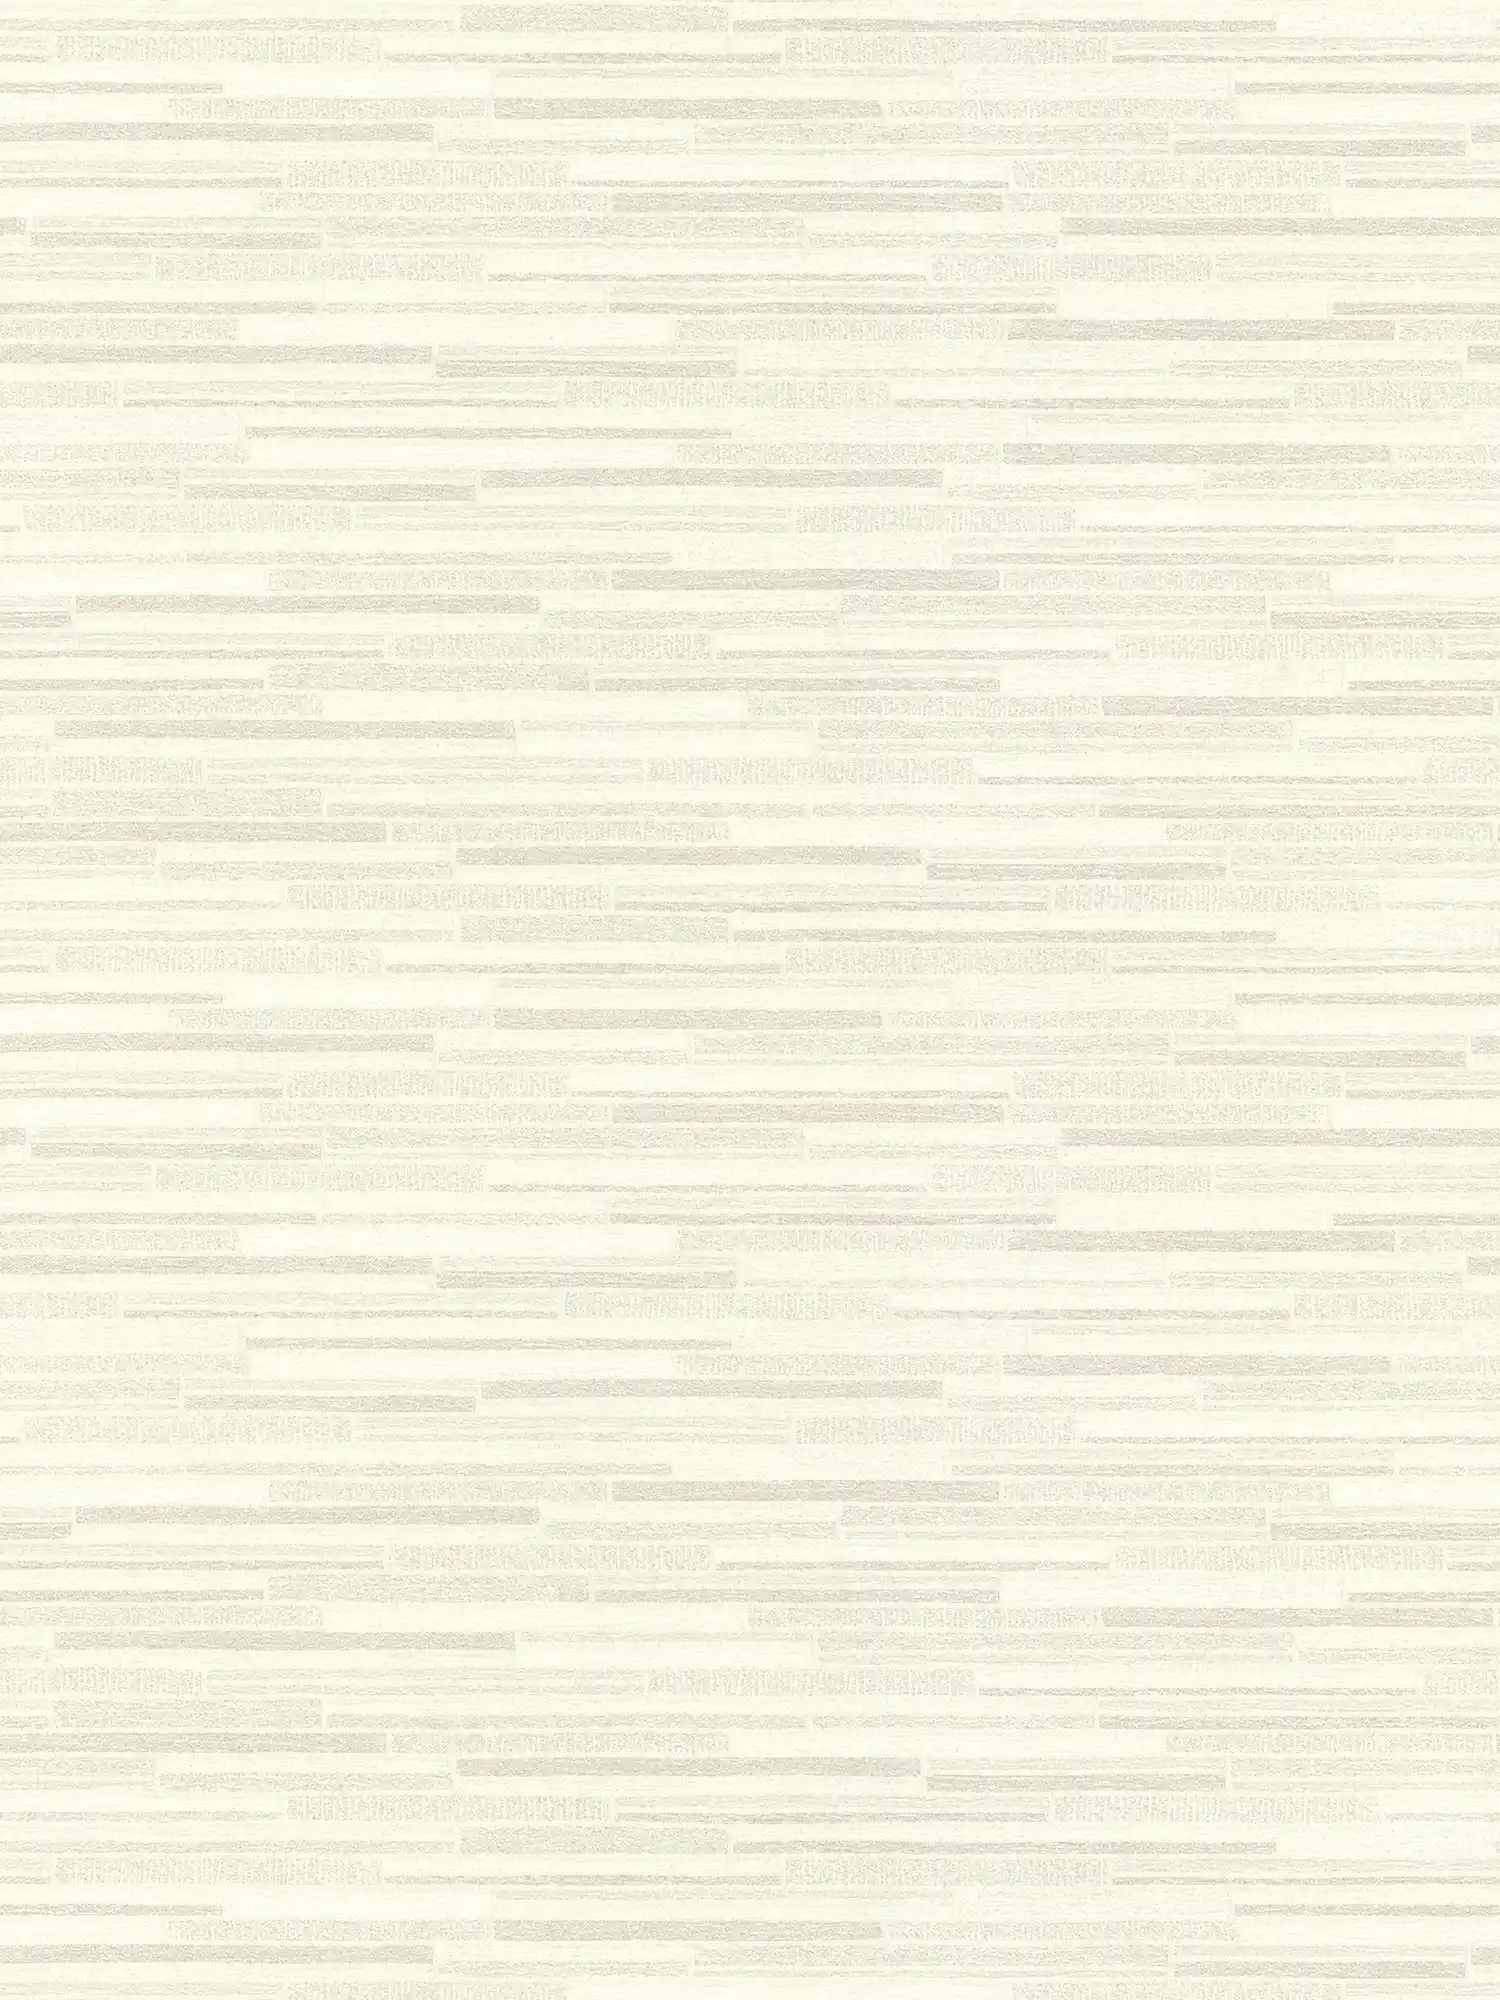 Wallpaper with line design & stone look - white, grey
